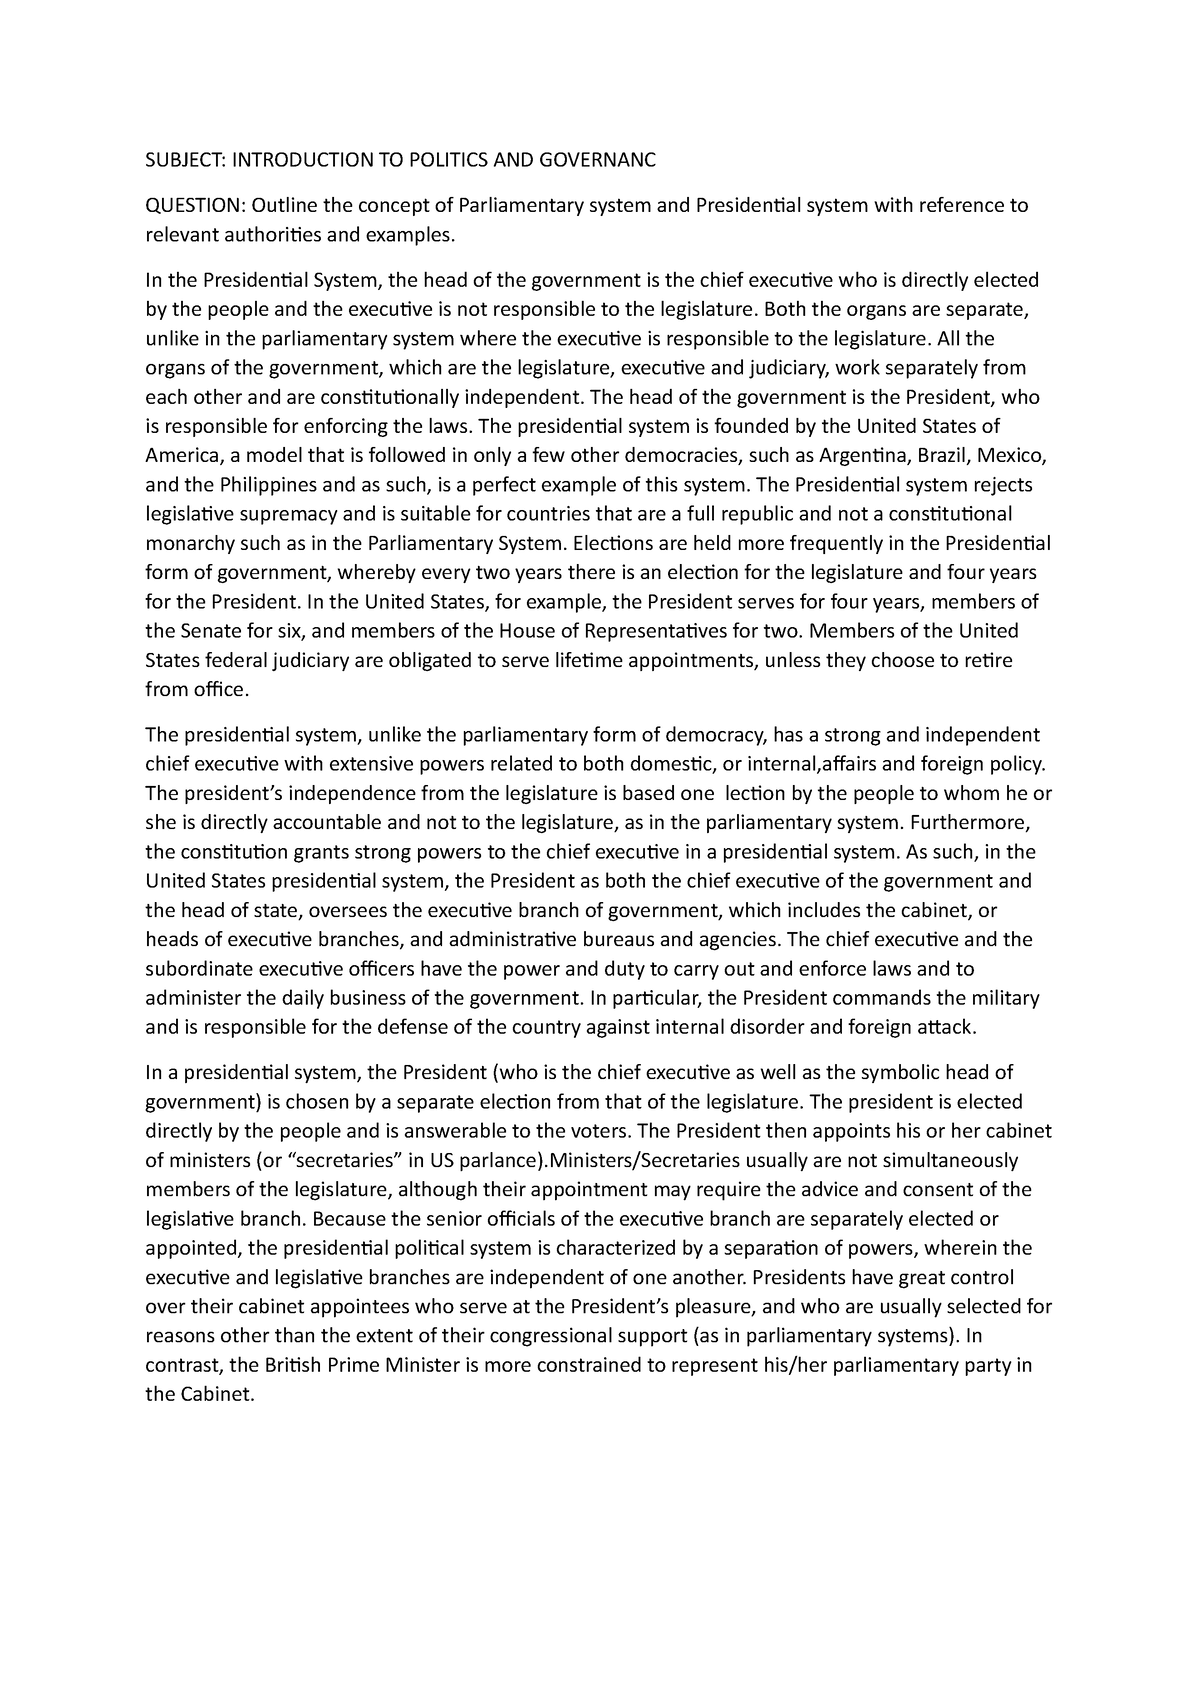 research paper about politics and governance